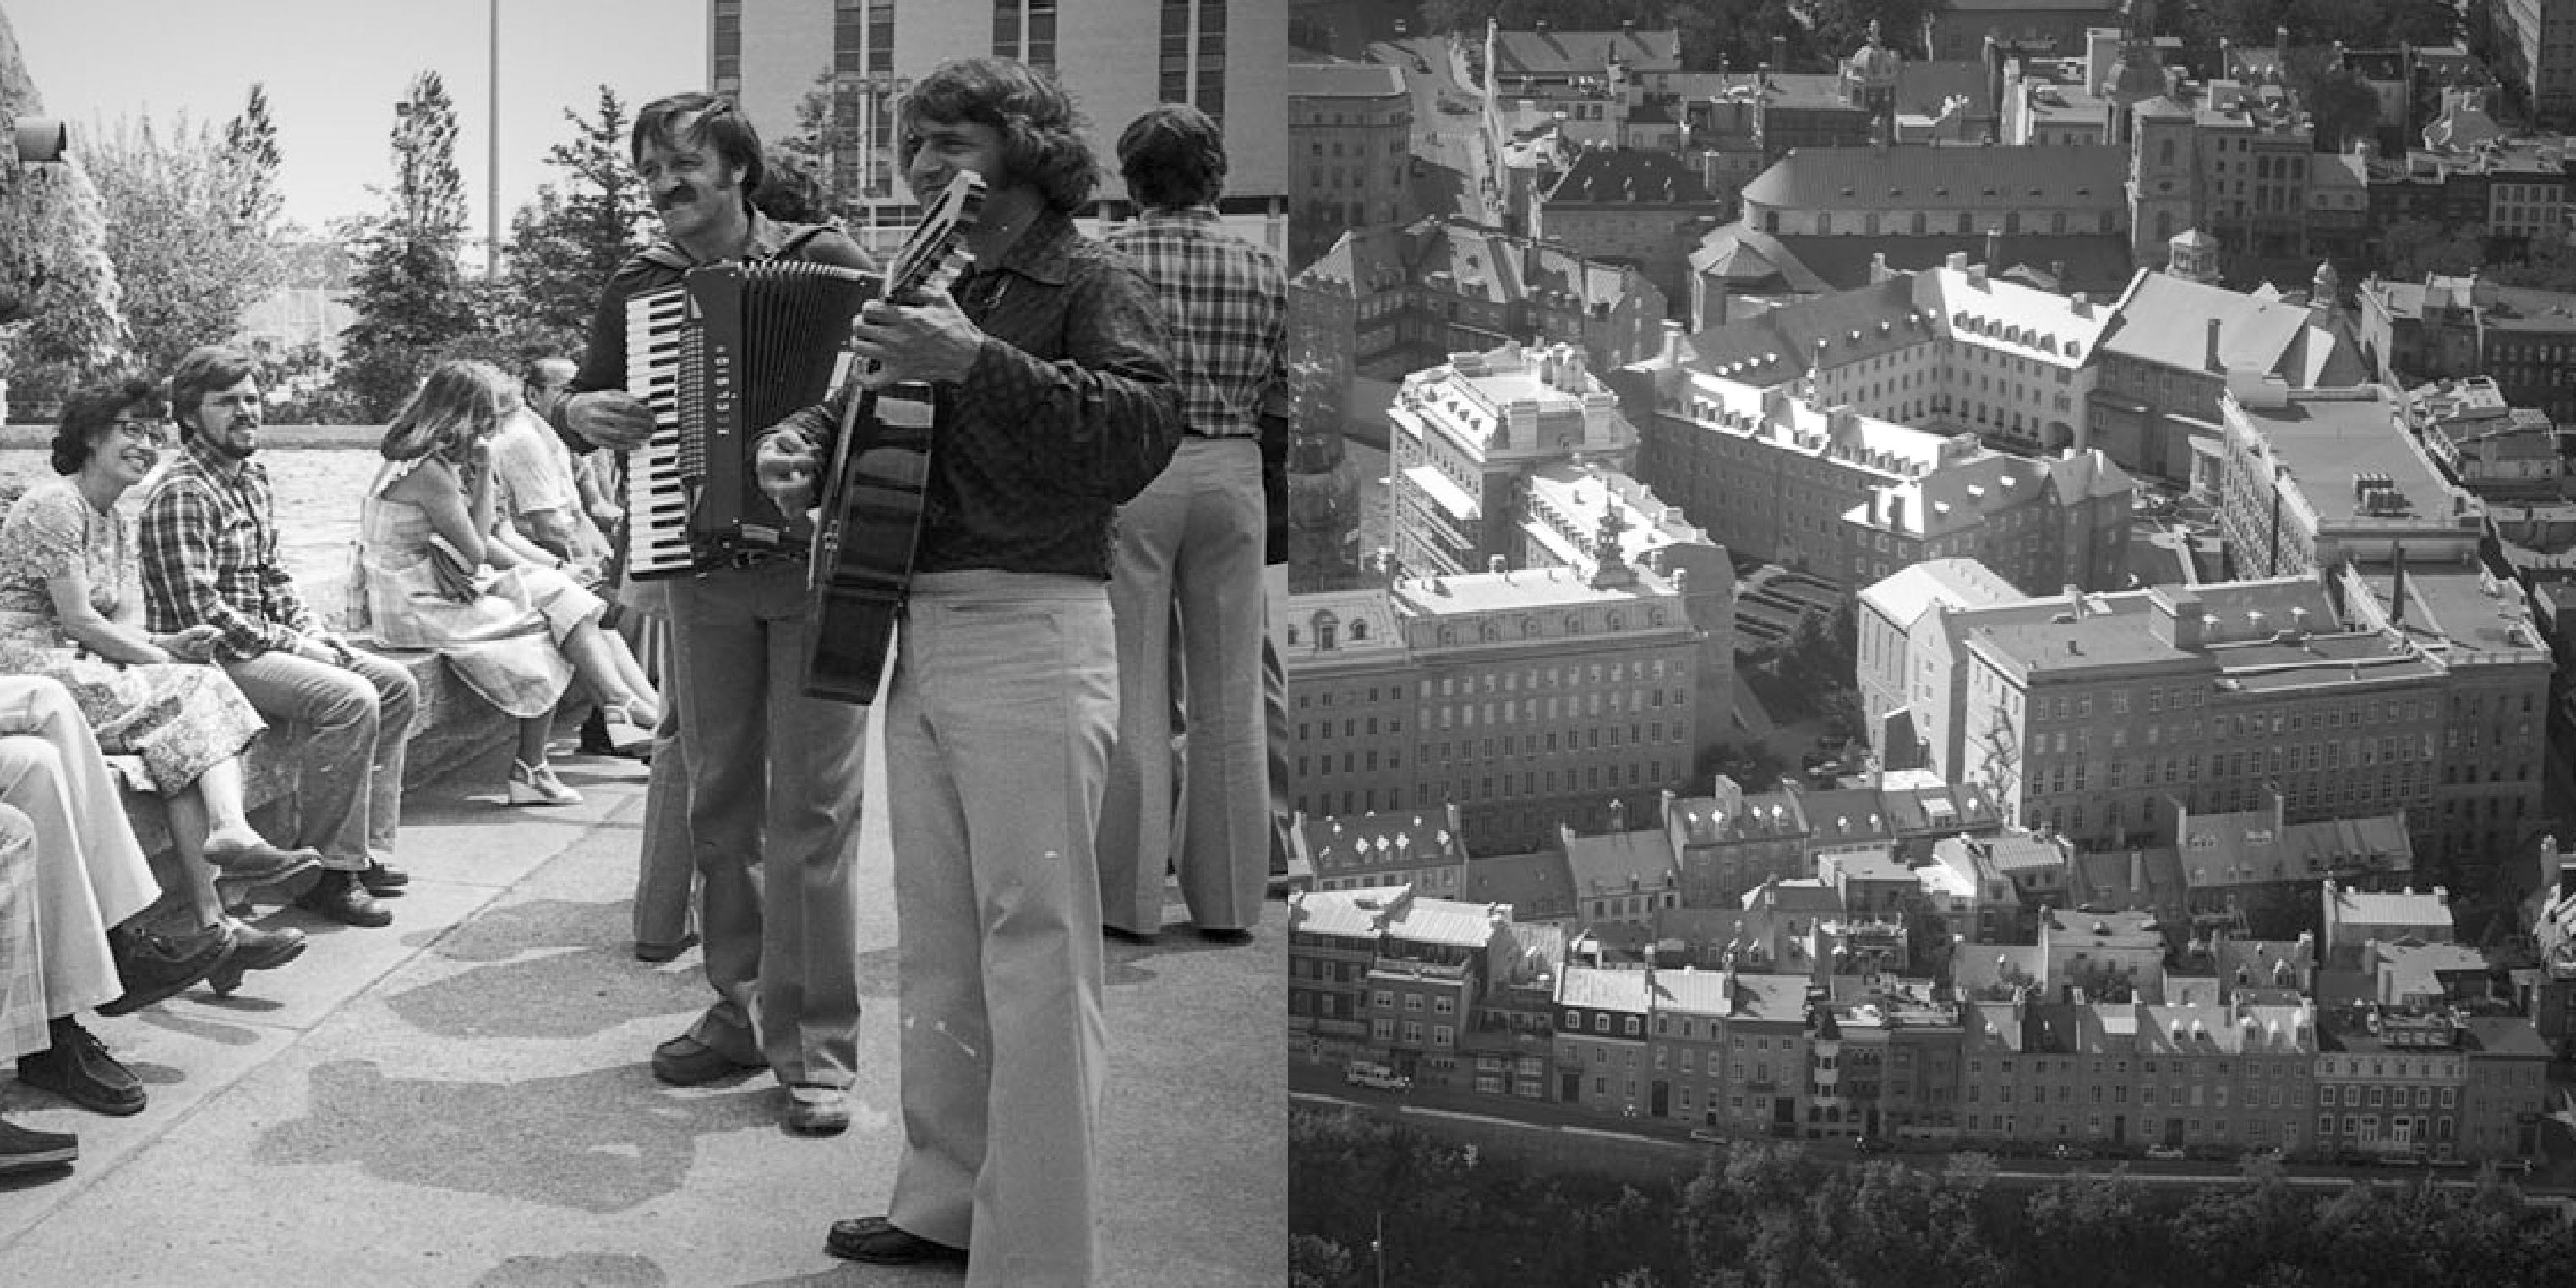 Black and white photos of musicians in the street and aerial view of the François-de-Laval building